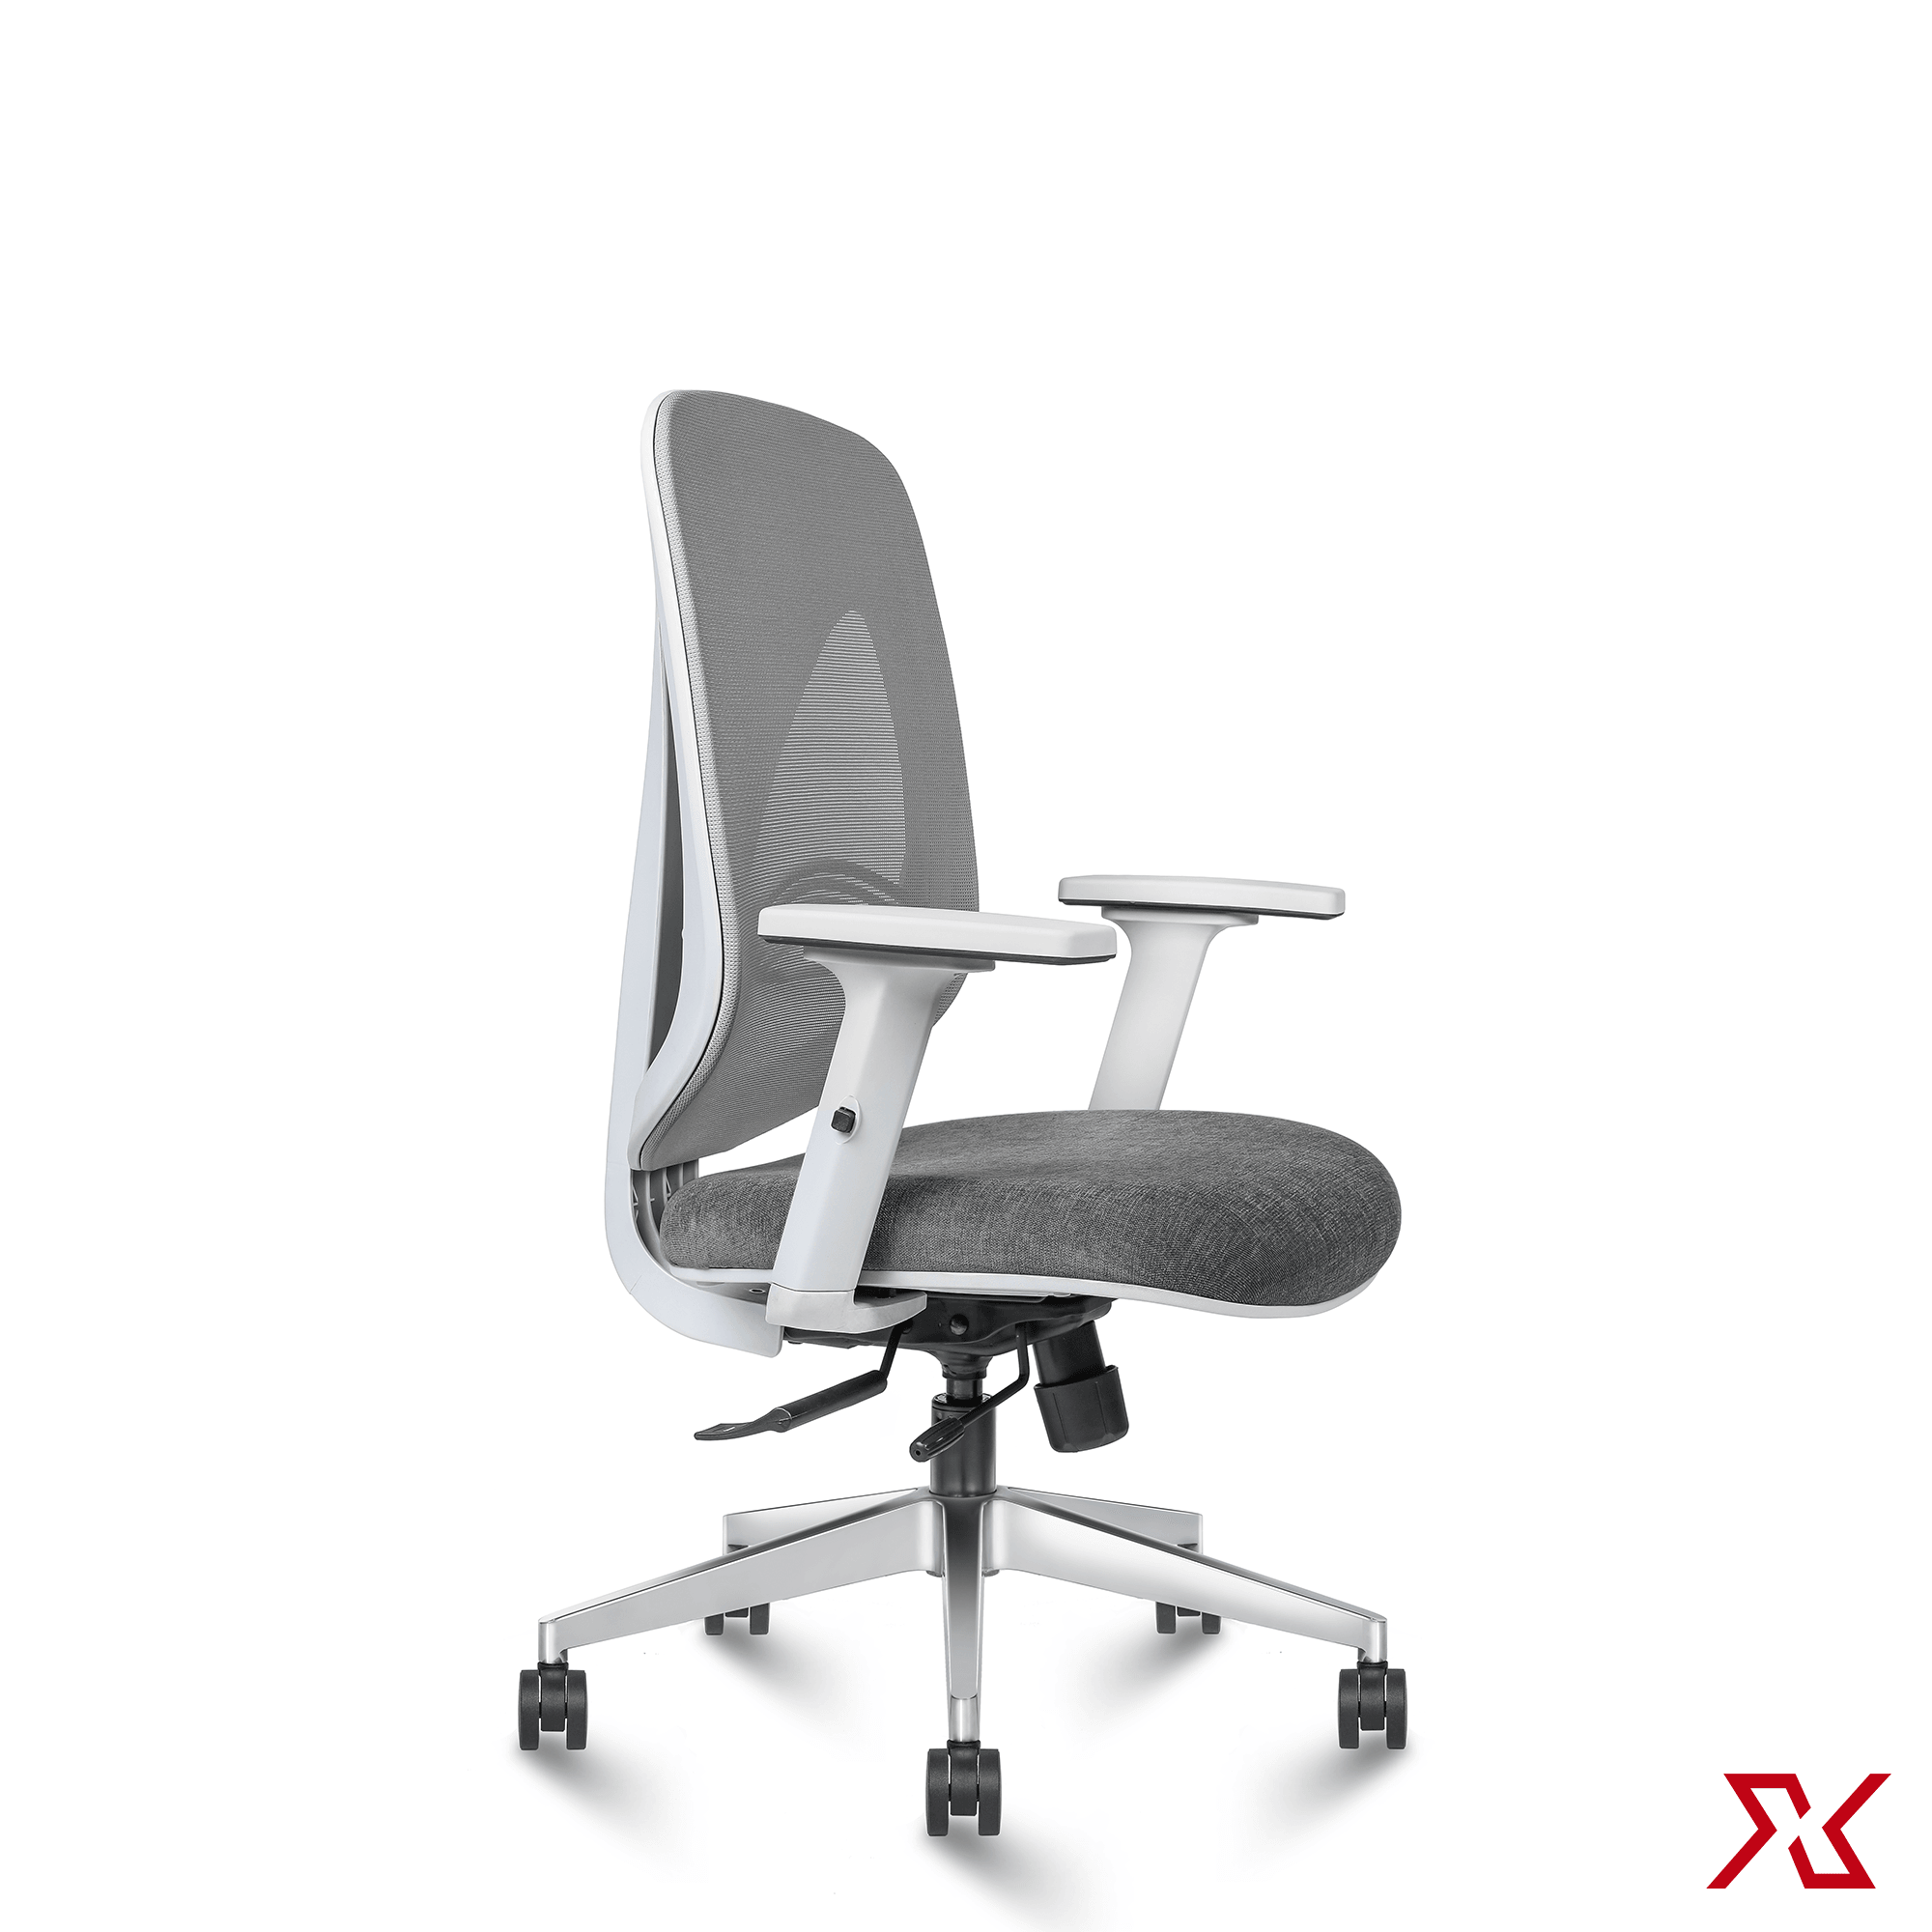 CLOUD Medium Back (Grey Chair) - Exclusiff Seating Sytems